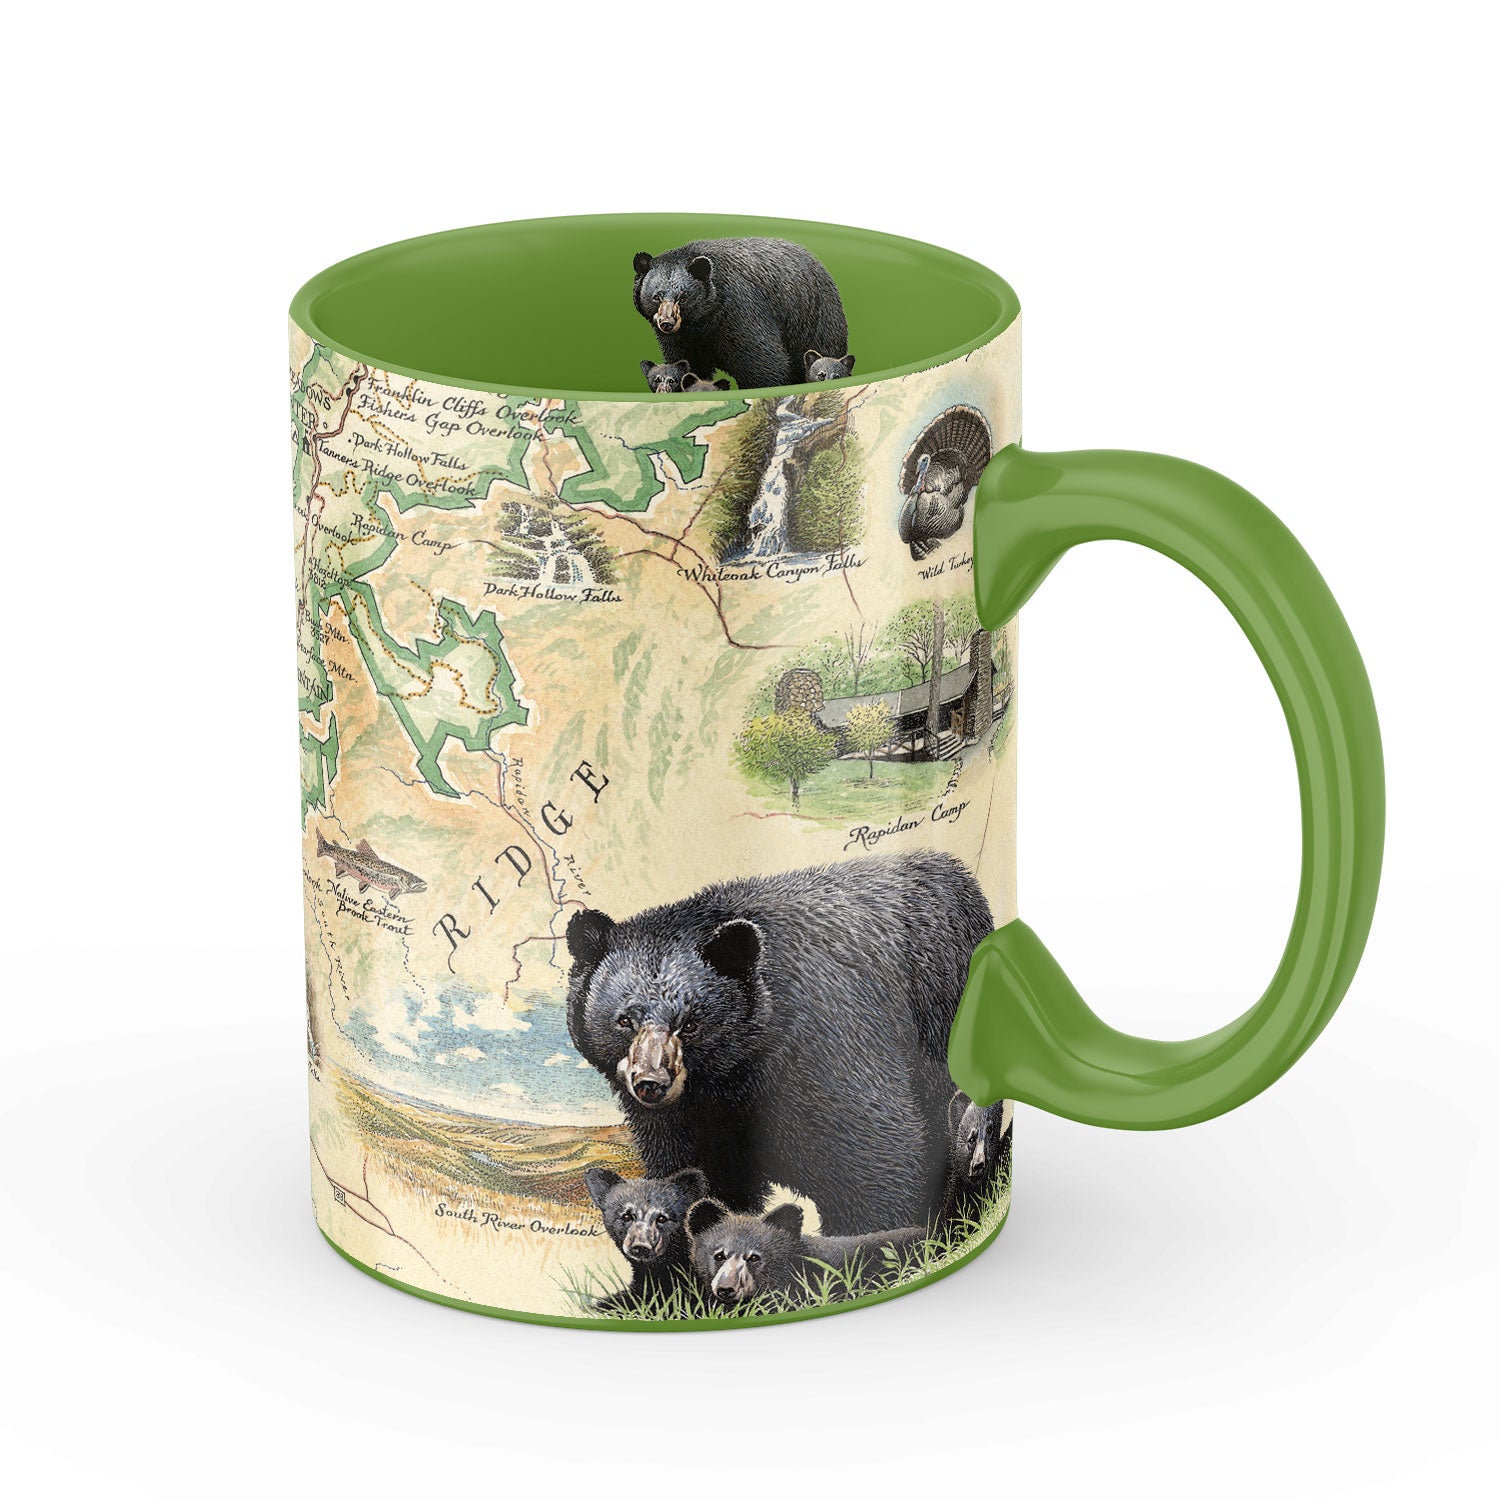 Green Shenandoah National Park Coffee Mug featuring the Blue Ridge Mountains, black and cubs, wild Turkey, Waterfalls, and more! 16 oz 